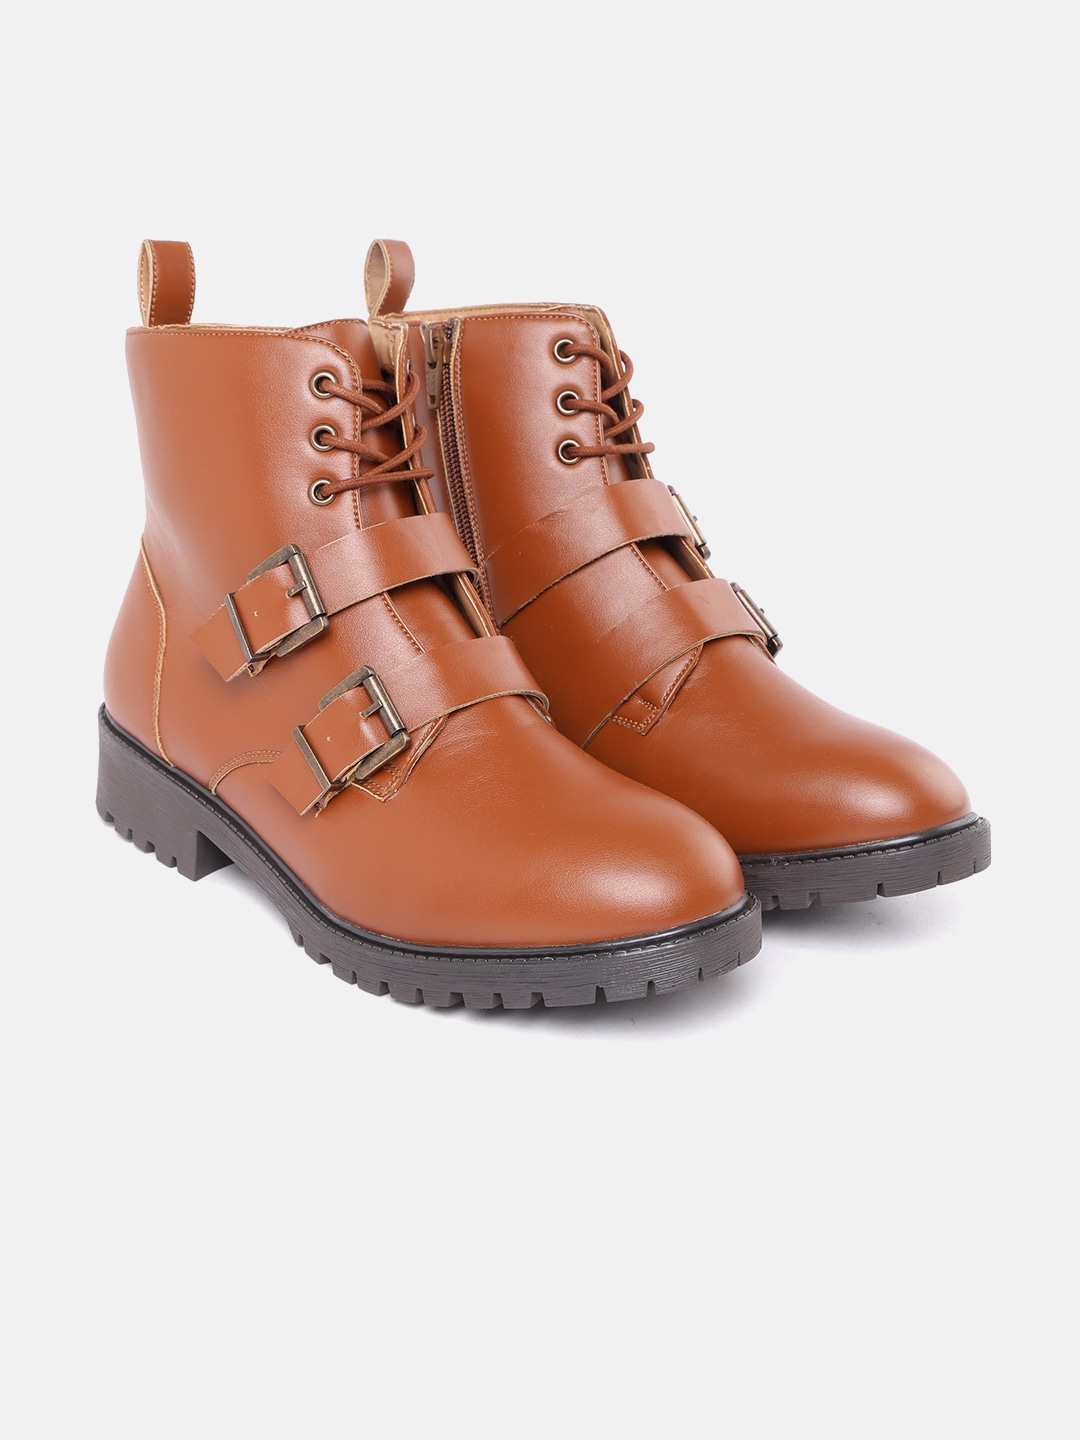 Roadster Women Tan Brown Solid Mid-Top Flat Boots with Buckle Detail Price in India